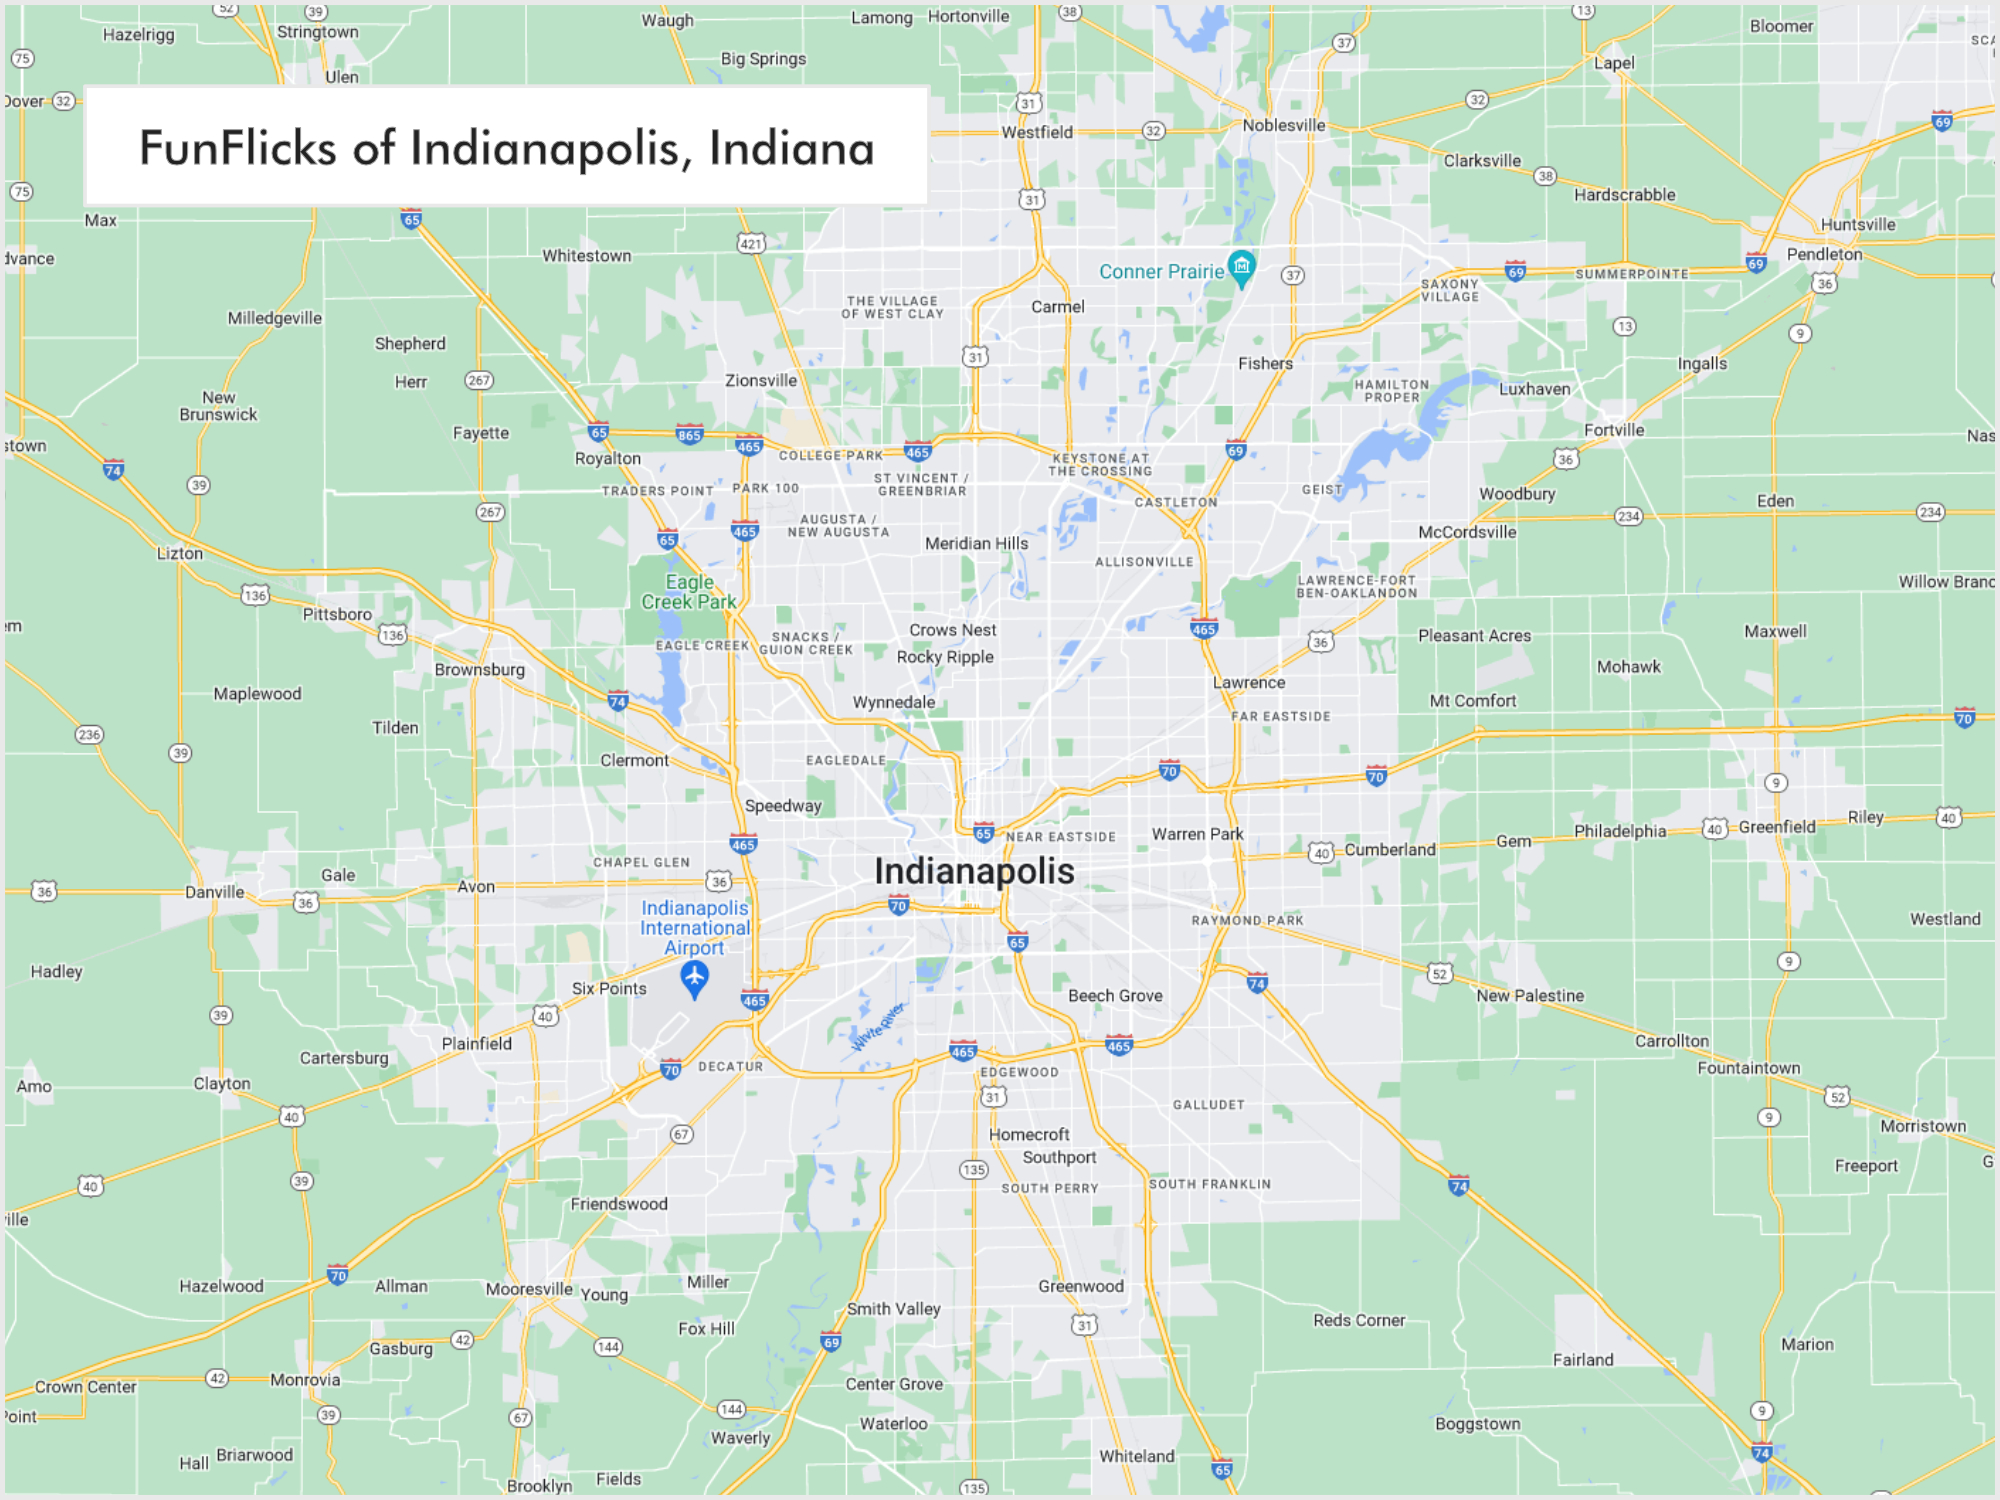 FunFlicks® Indianapolis territory map